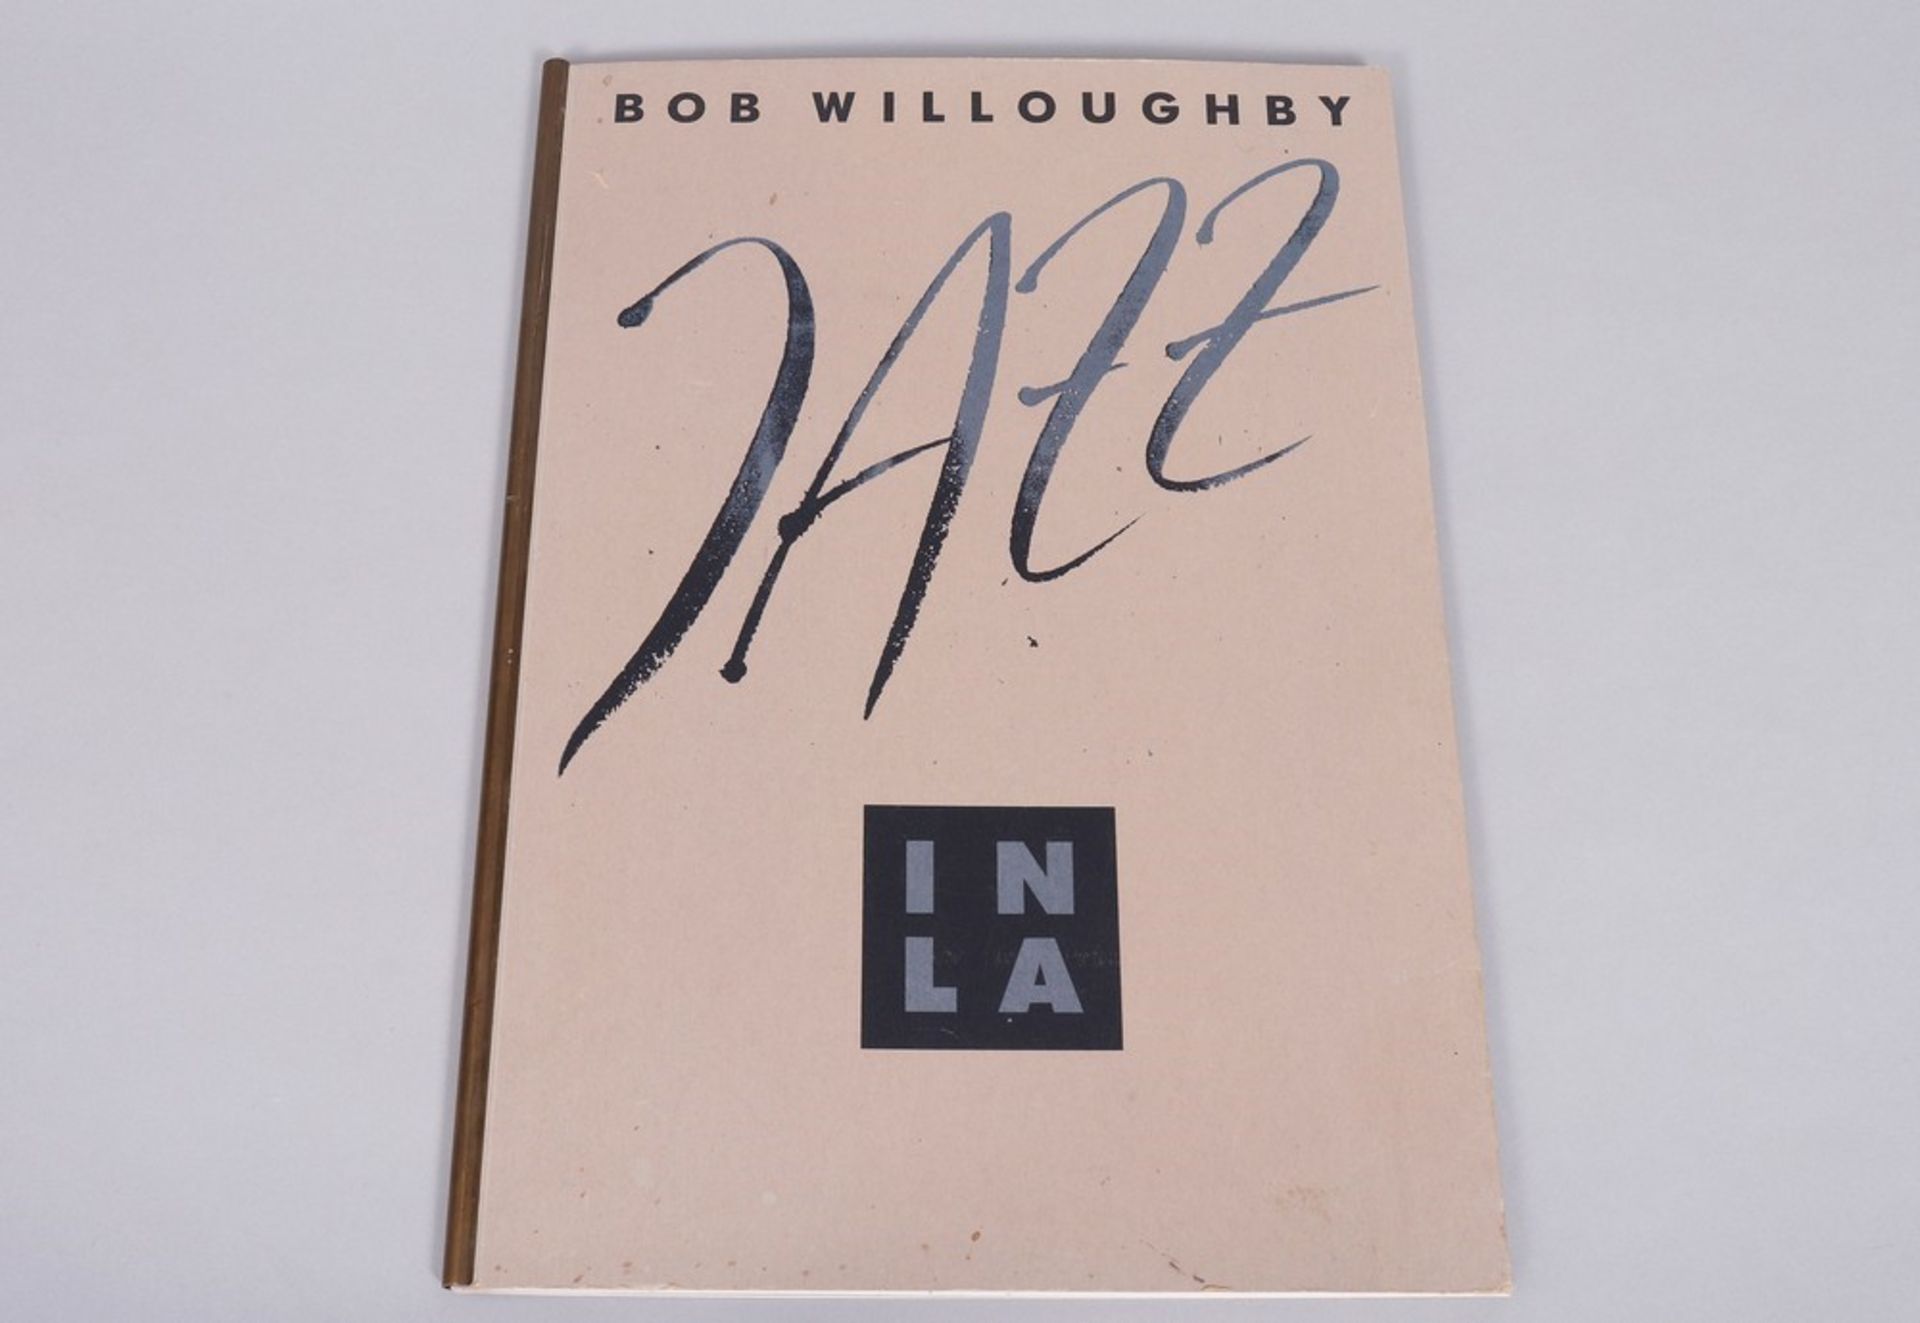 Book, Bob Willoughby (1927, Los Angeles - 2009, Vence) - Image 3 of 10